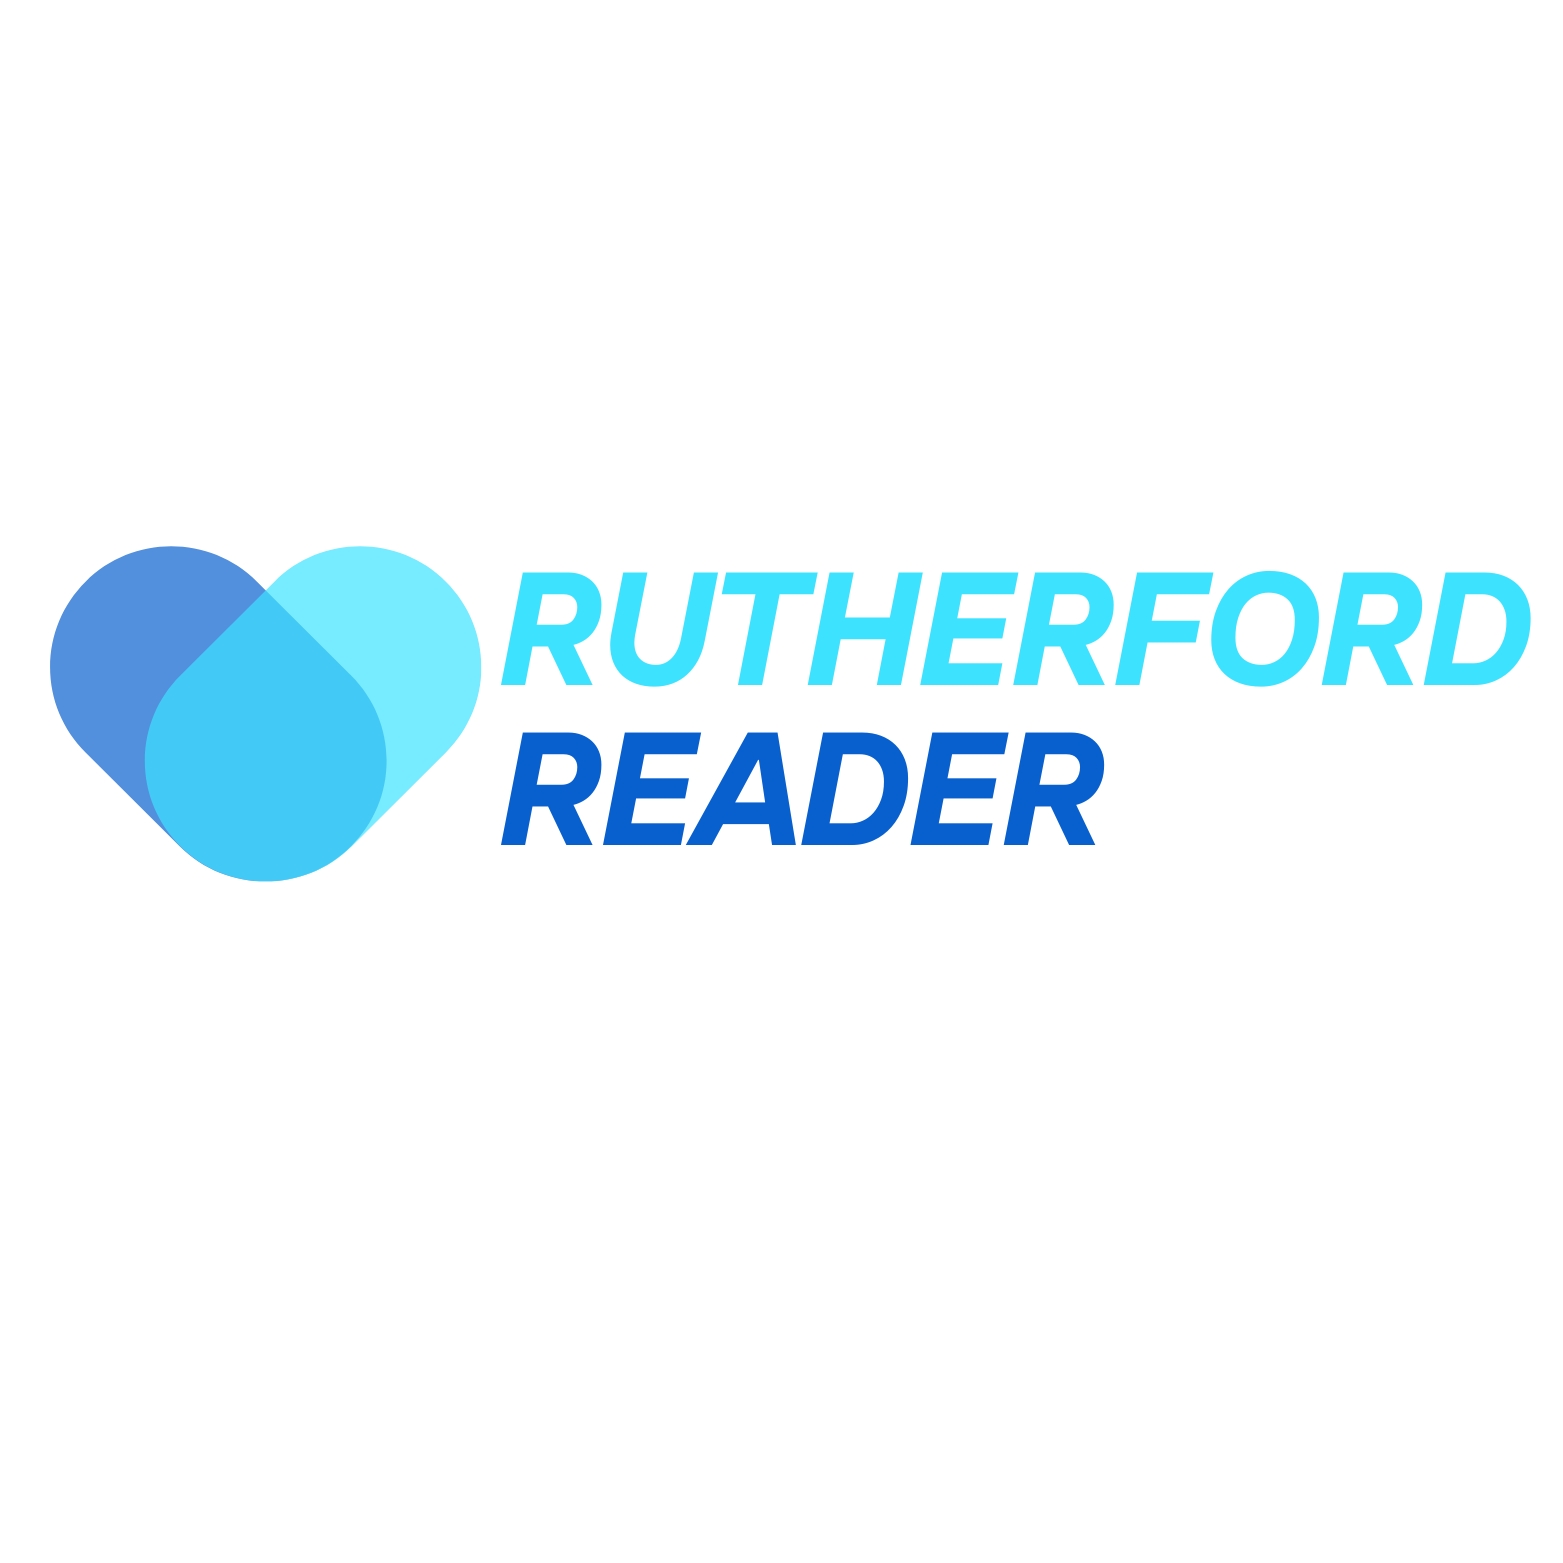 Rutherford Reader